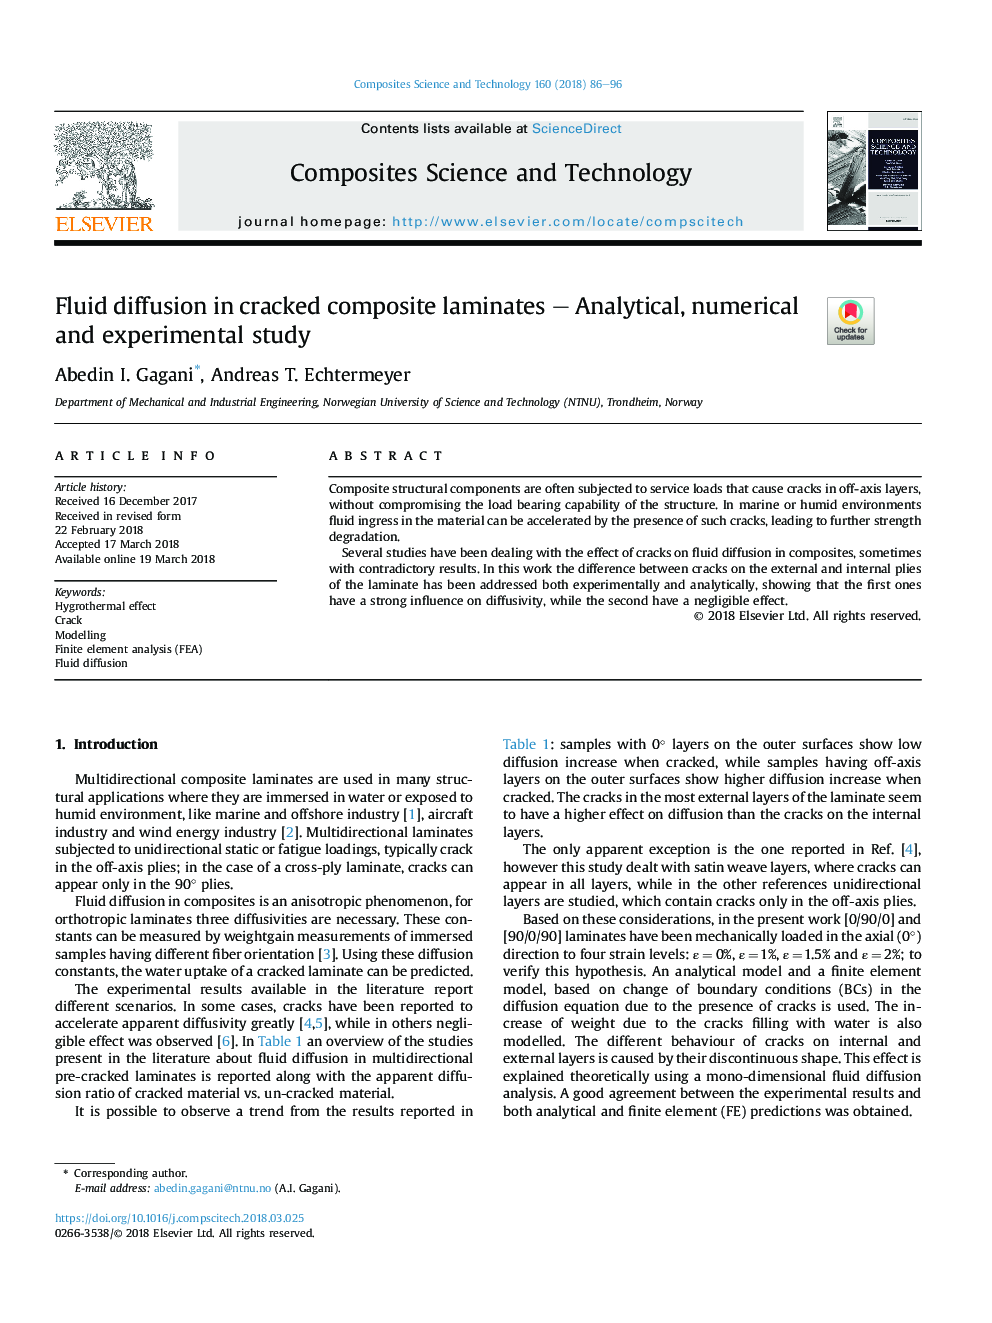 Fluid diffusion in cracked composite laminates - Analytical, numerical and experimental study